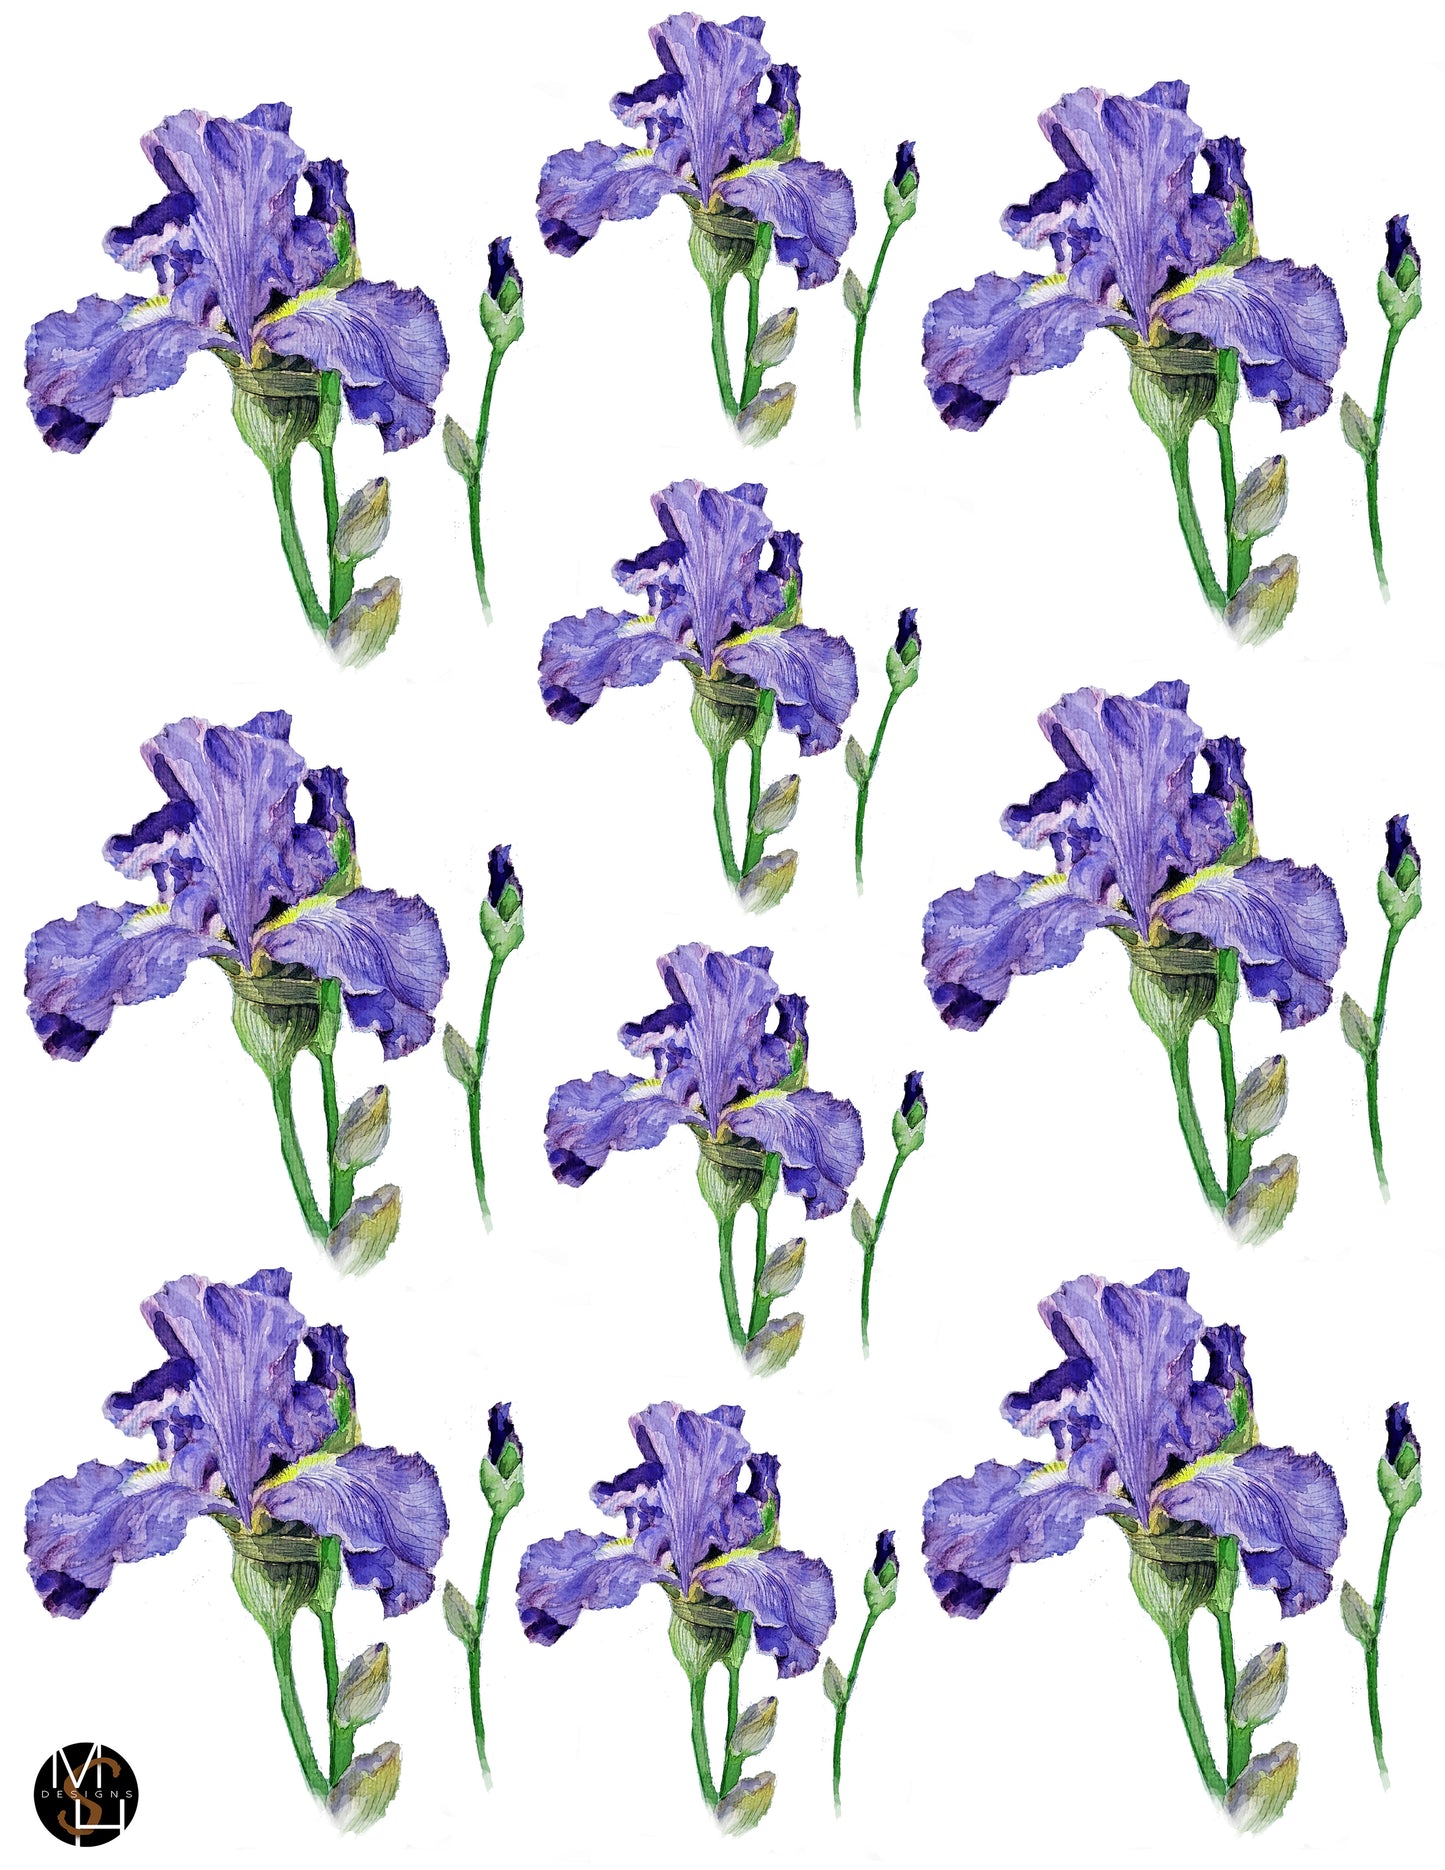 Irises, designed by Mark Hufford